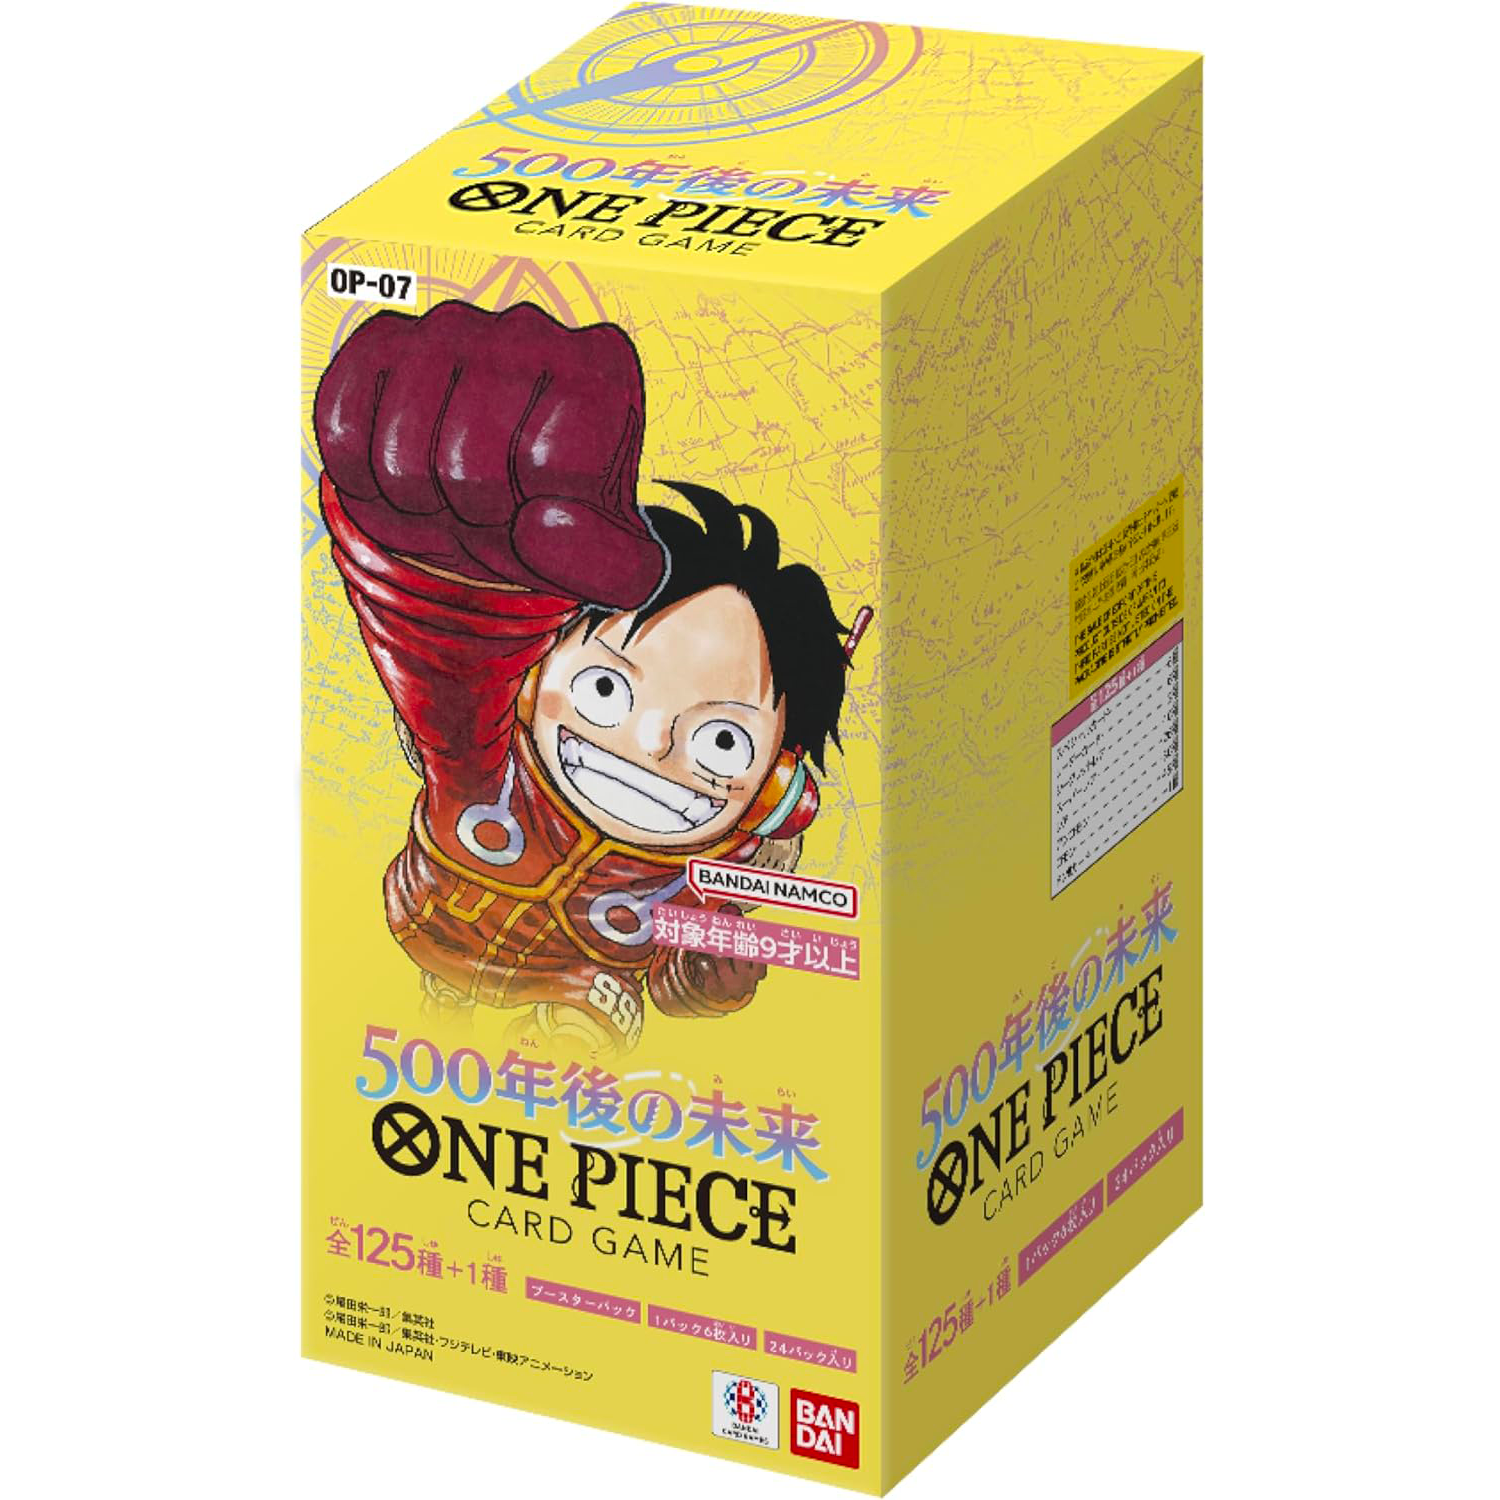 [OP-07] ONE PIECE CARD GAME Booster Pack ｢500 Years in the Future｣ Box